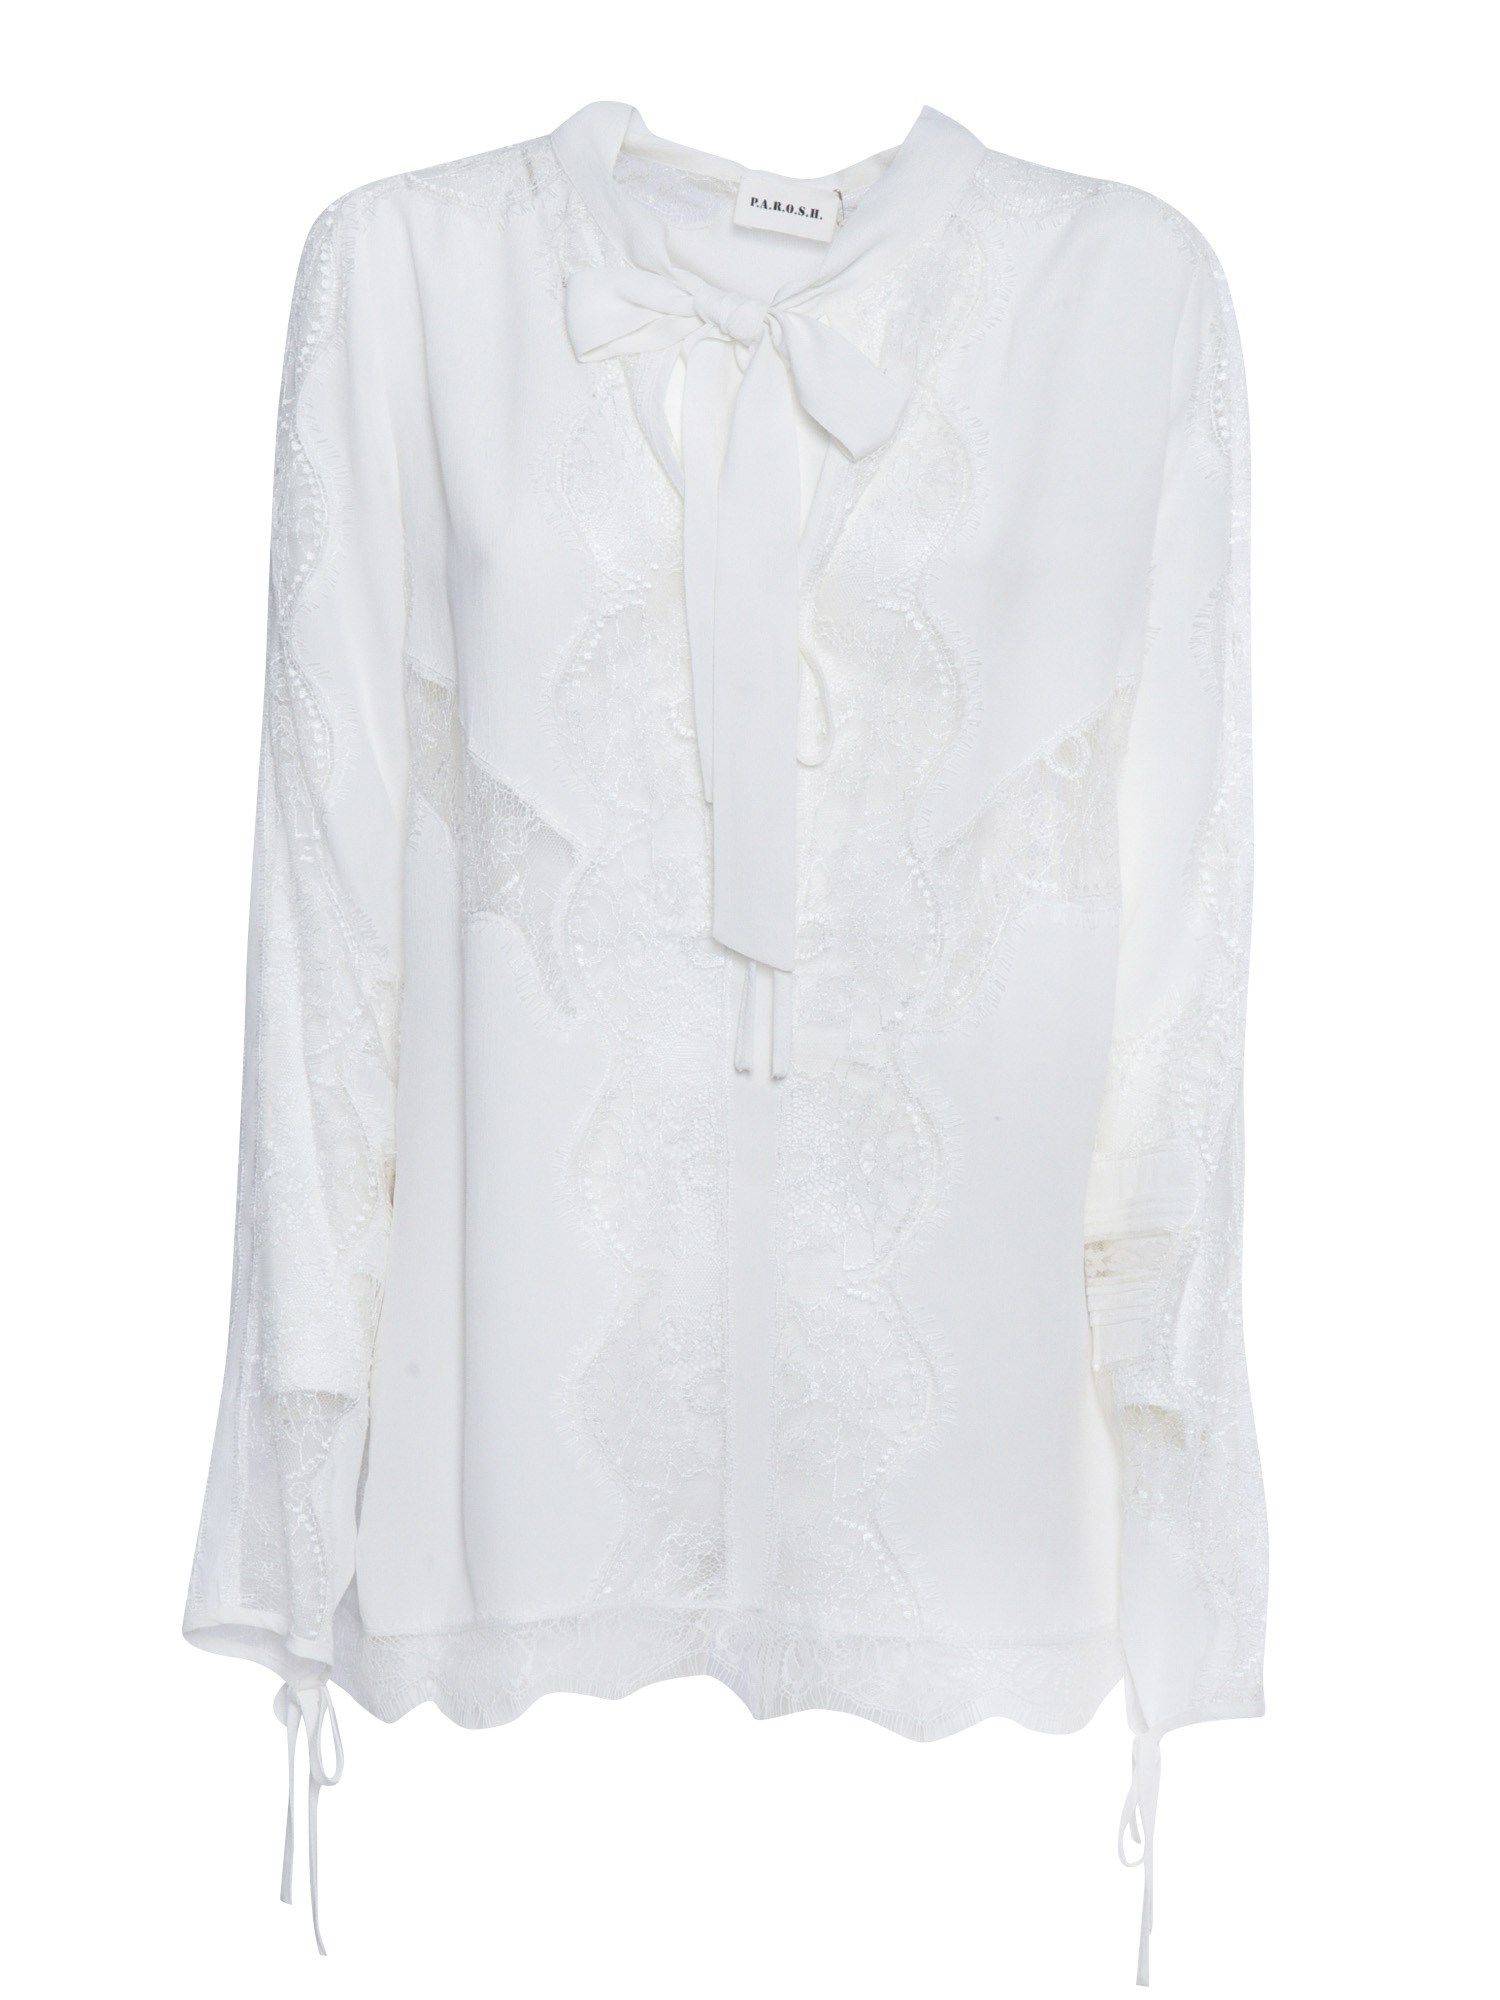 Shop P.a.r.o.s.h White Shirt With Lace